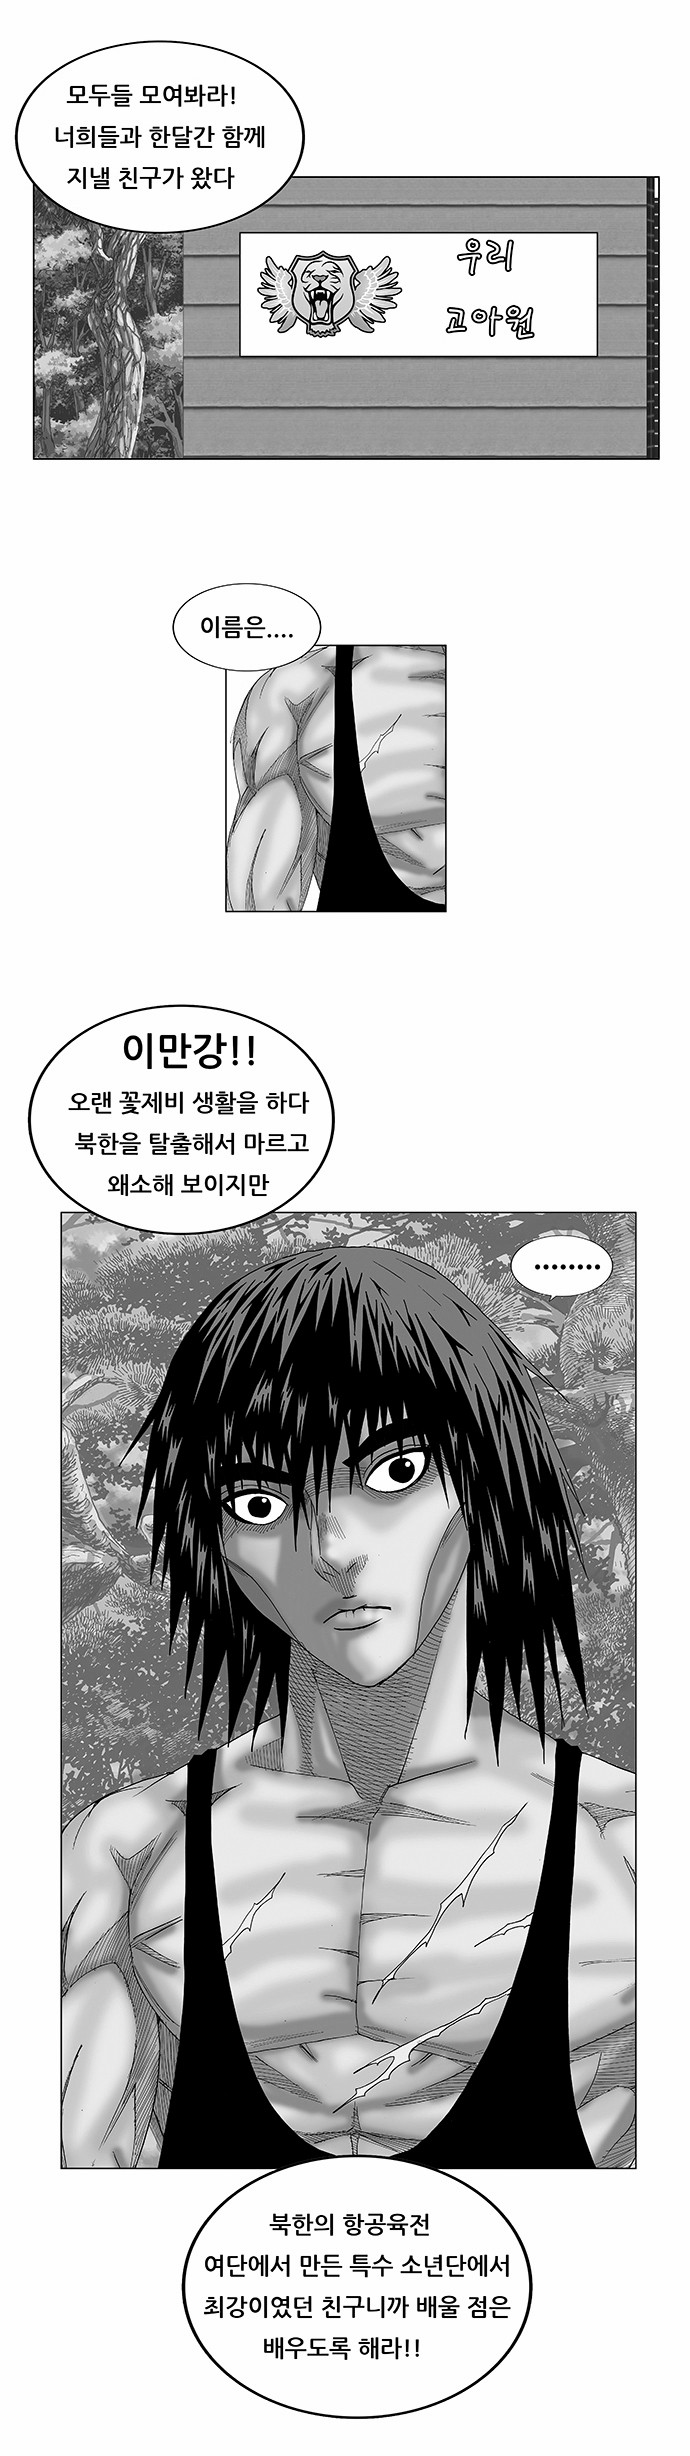 Ultimate Legend - Kang Hae Hyo - Chapter 84 - Page 1